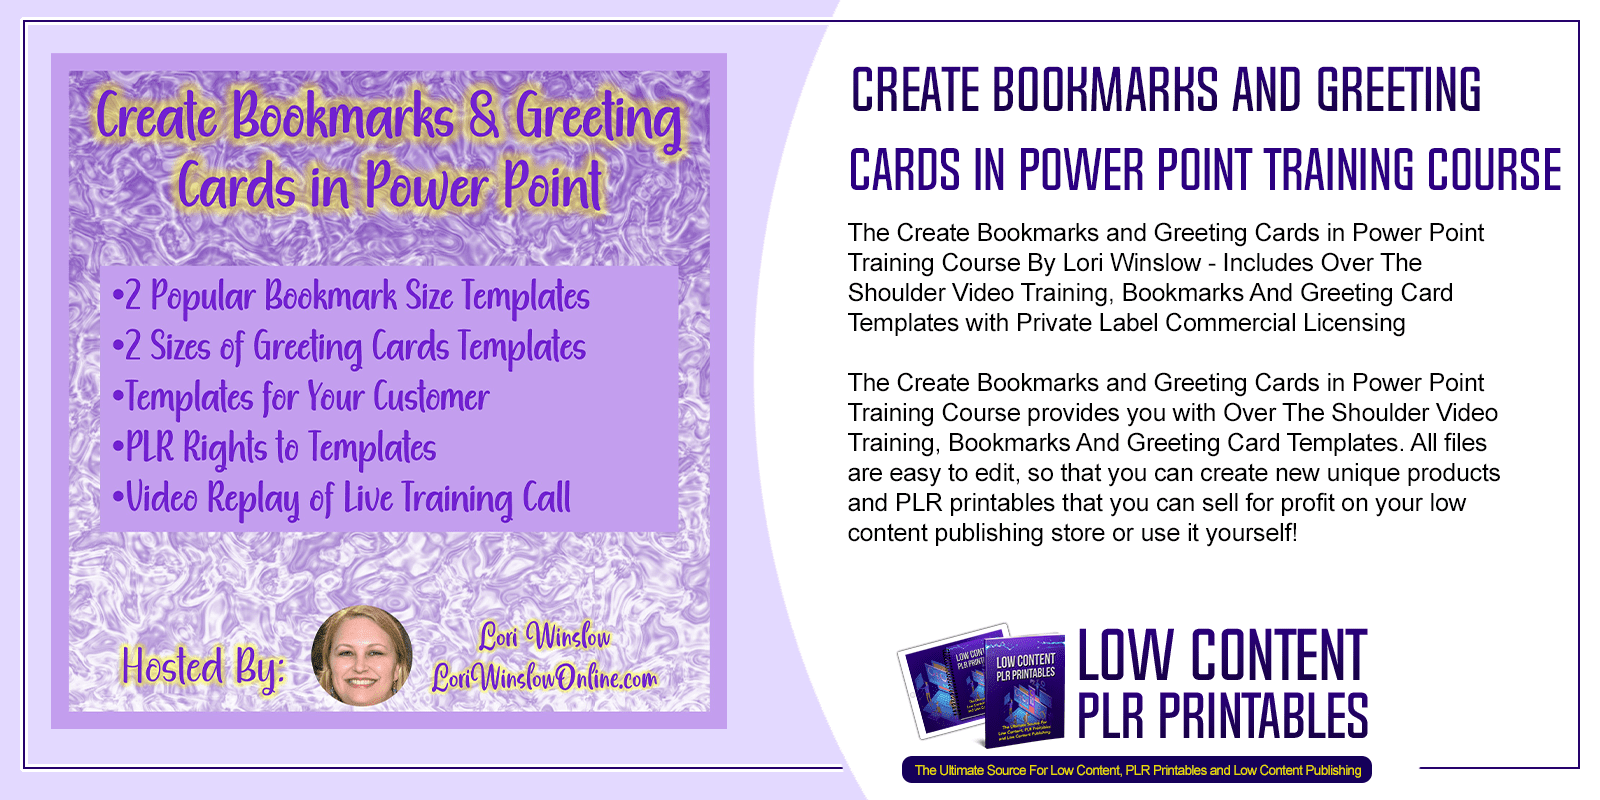 Create Bookmarks and Greeting Cards in Power Point Training Course